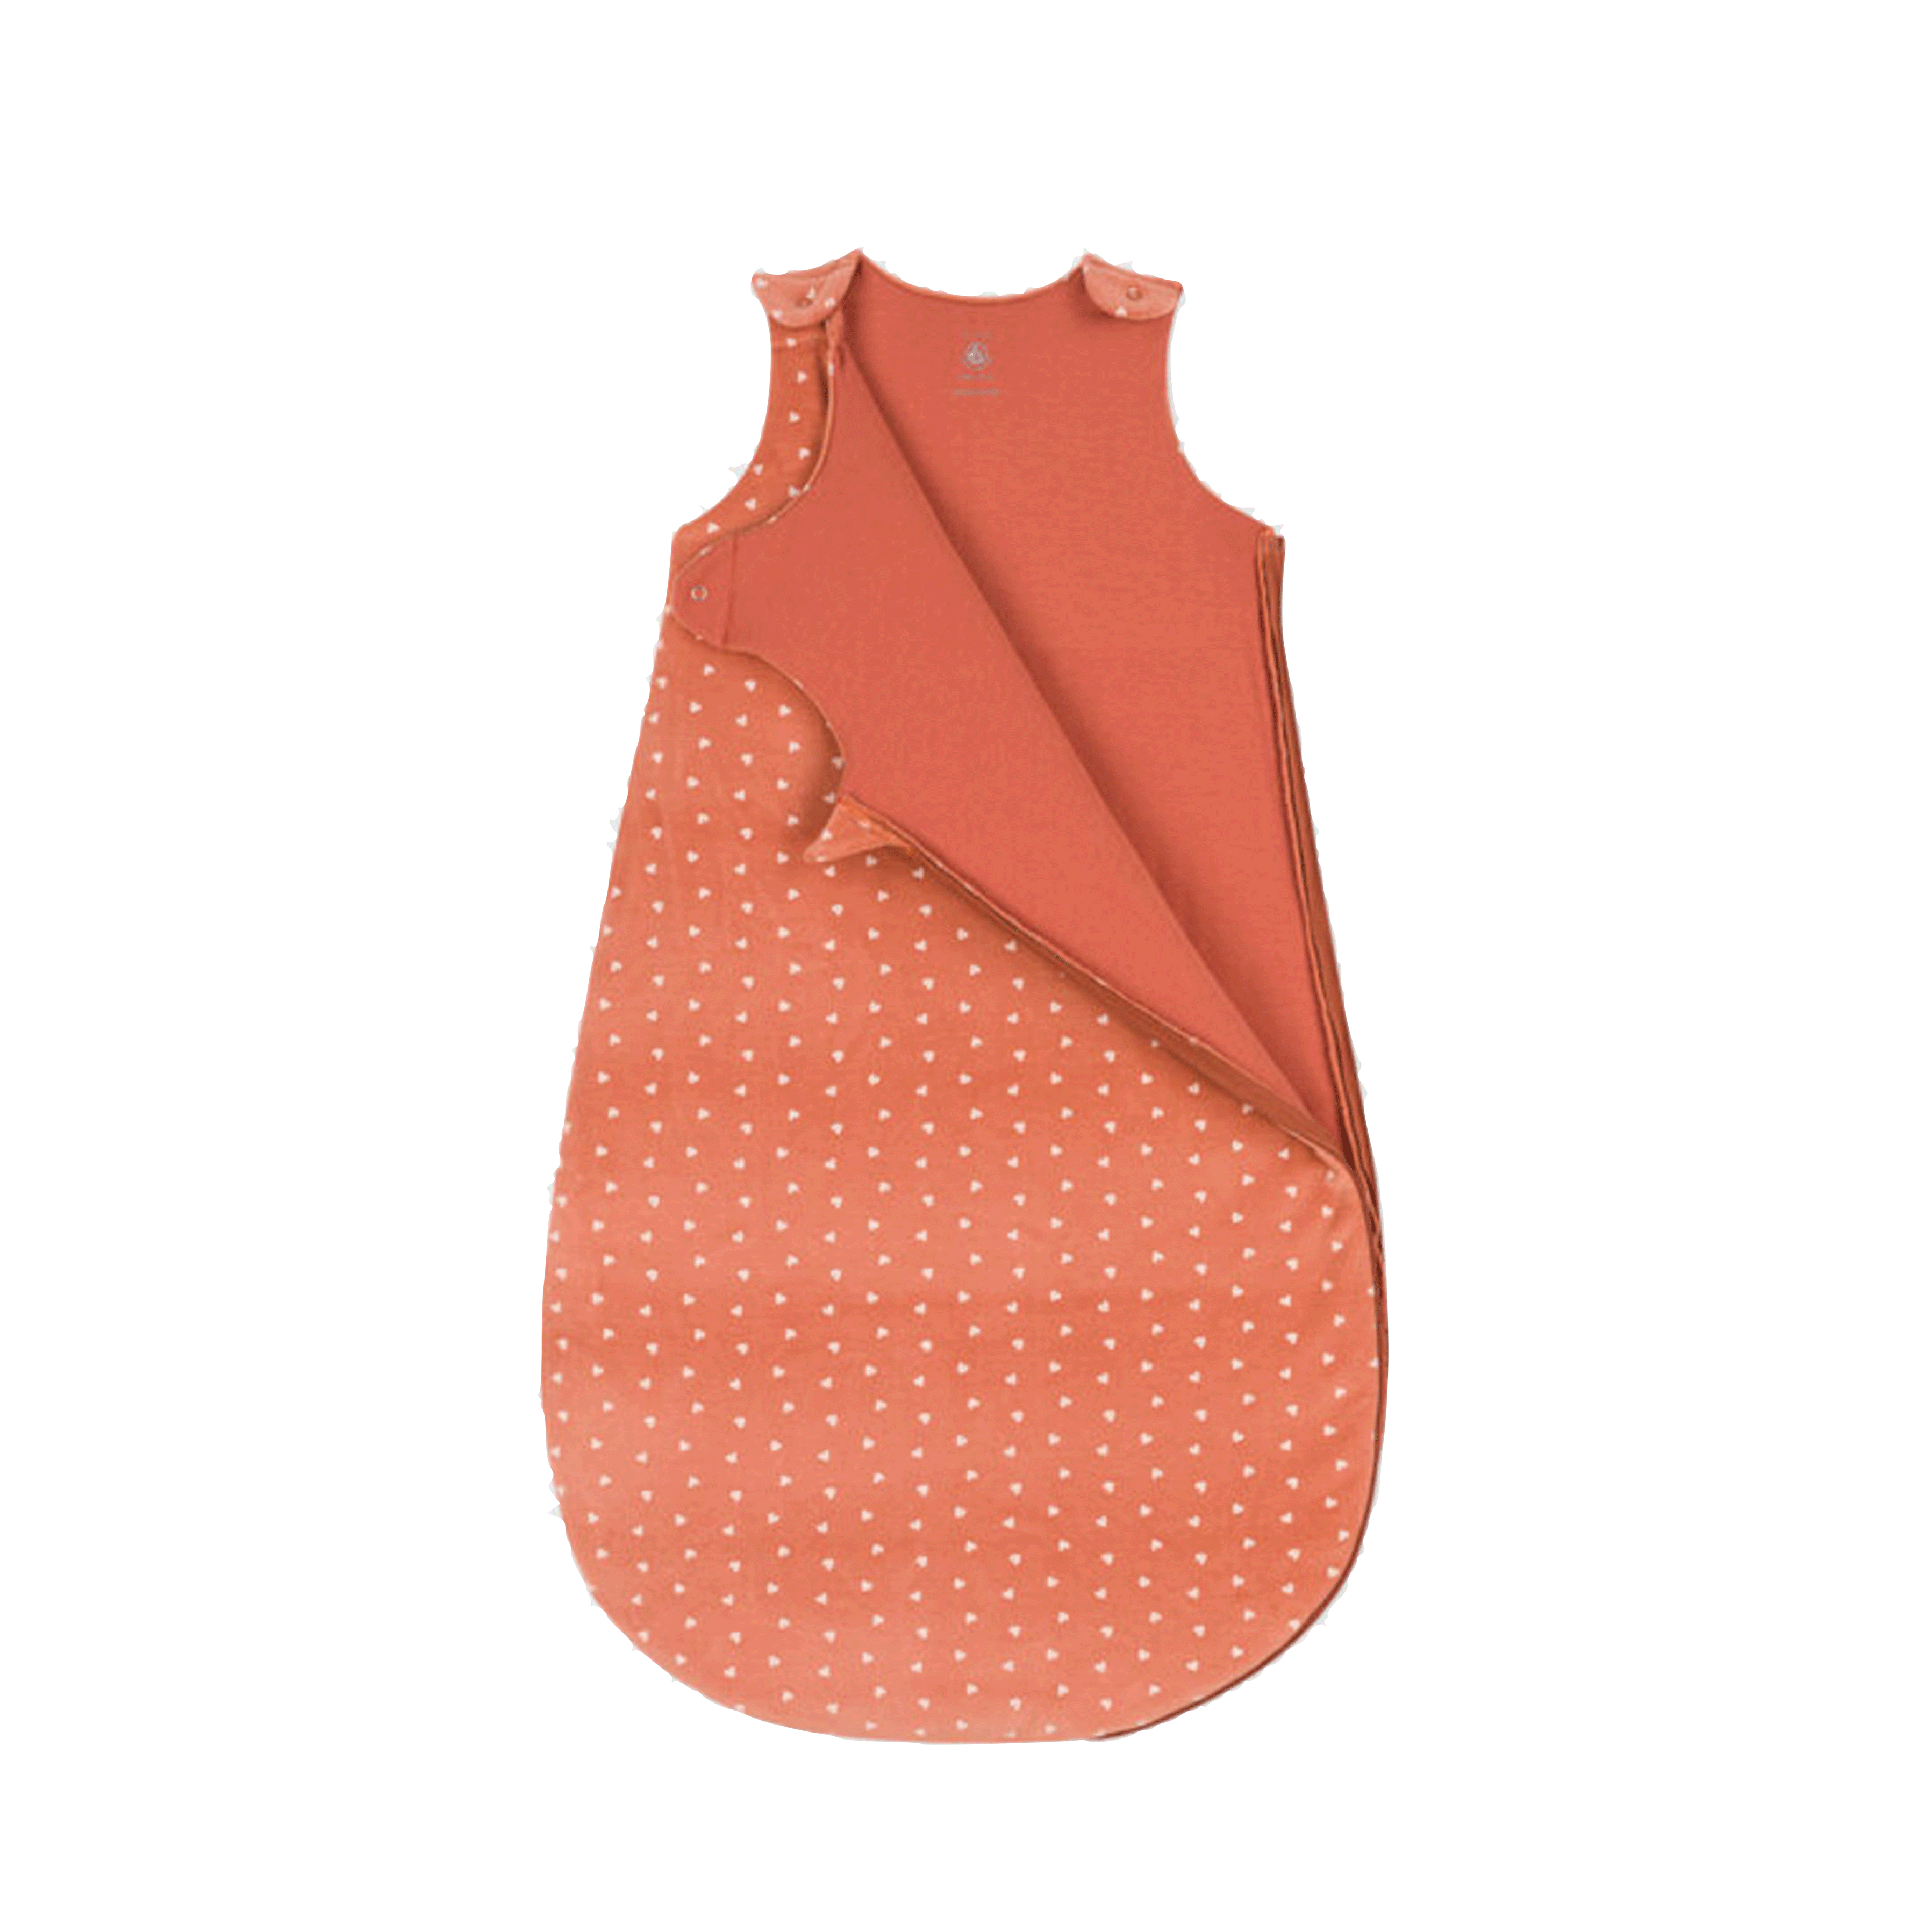 Luxury Baby Sleep Bag in Velour by Petit Bateau at Bonjour Baby Baskets